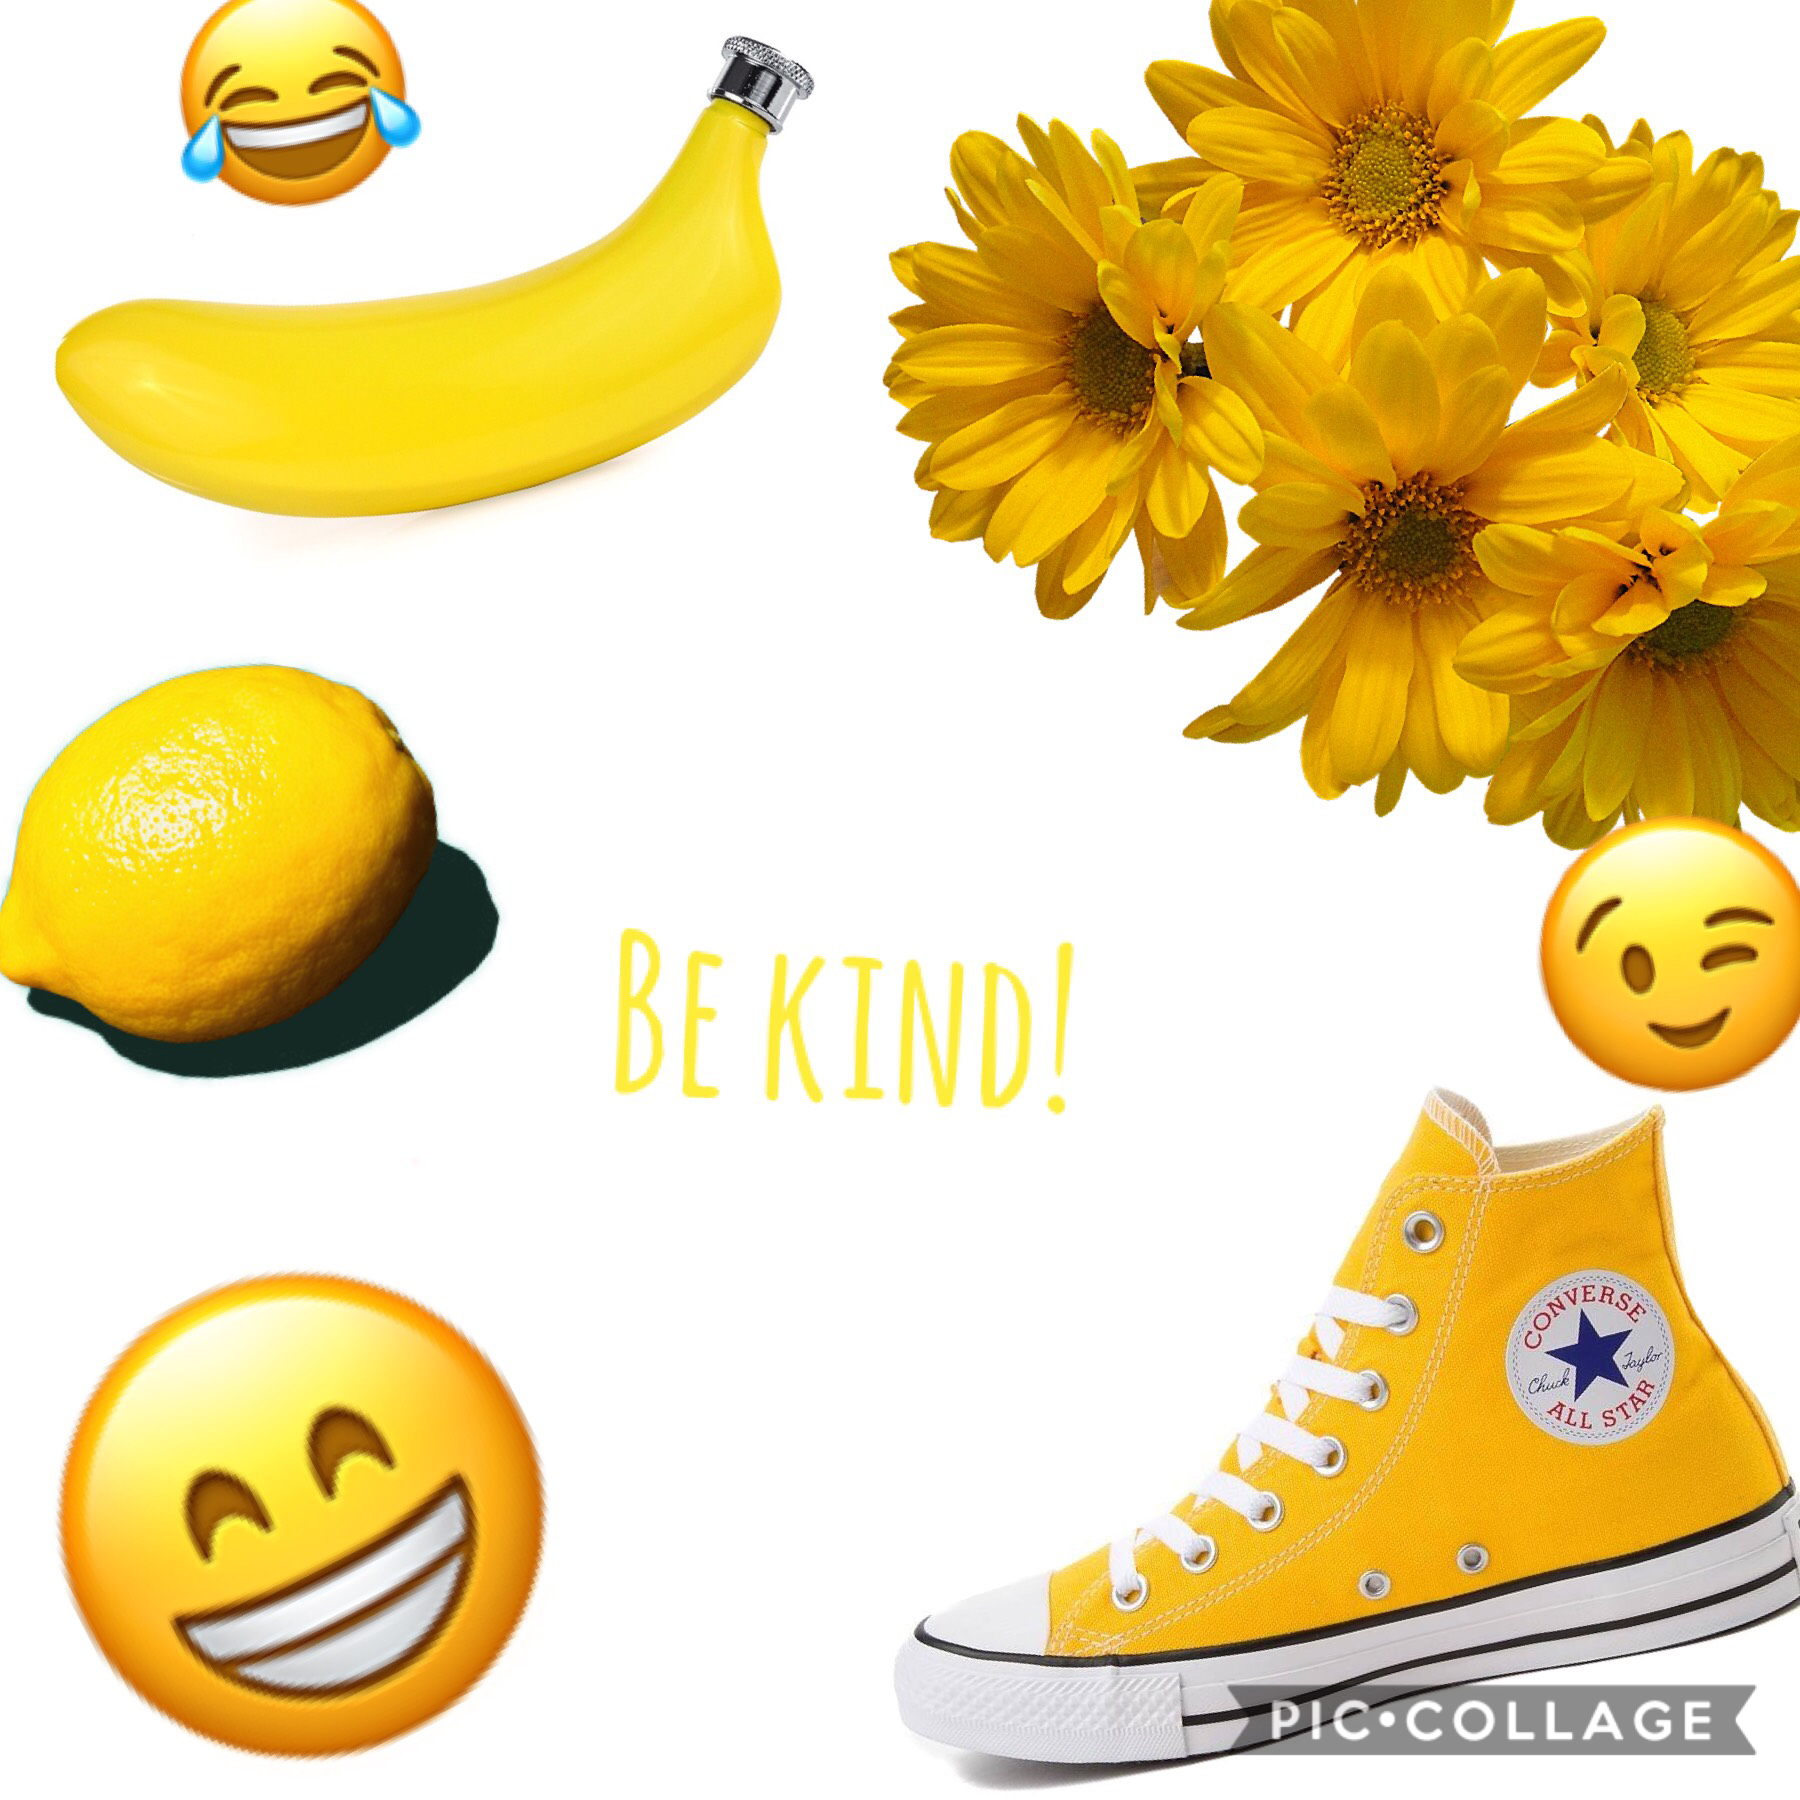 Be Kind........
Can someone please give me some tips on making collages?